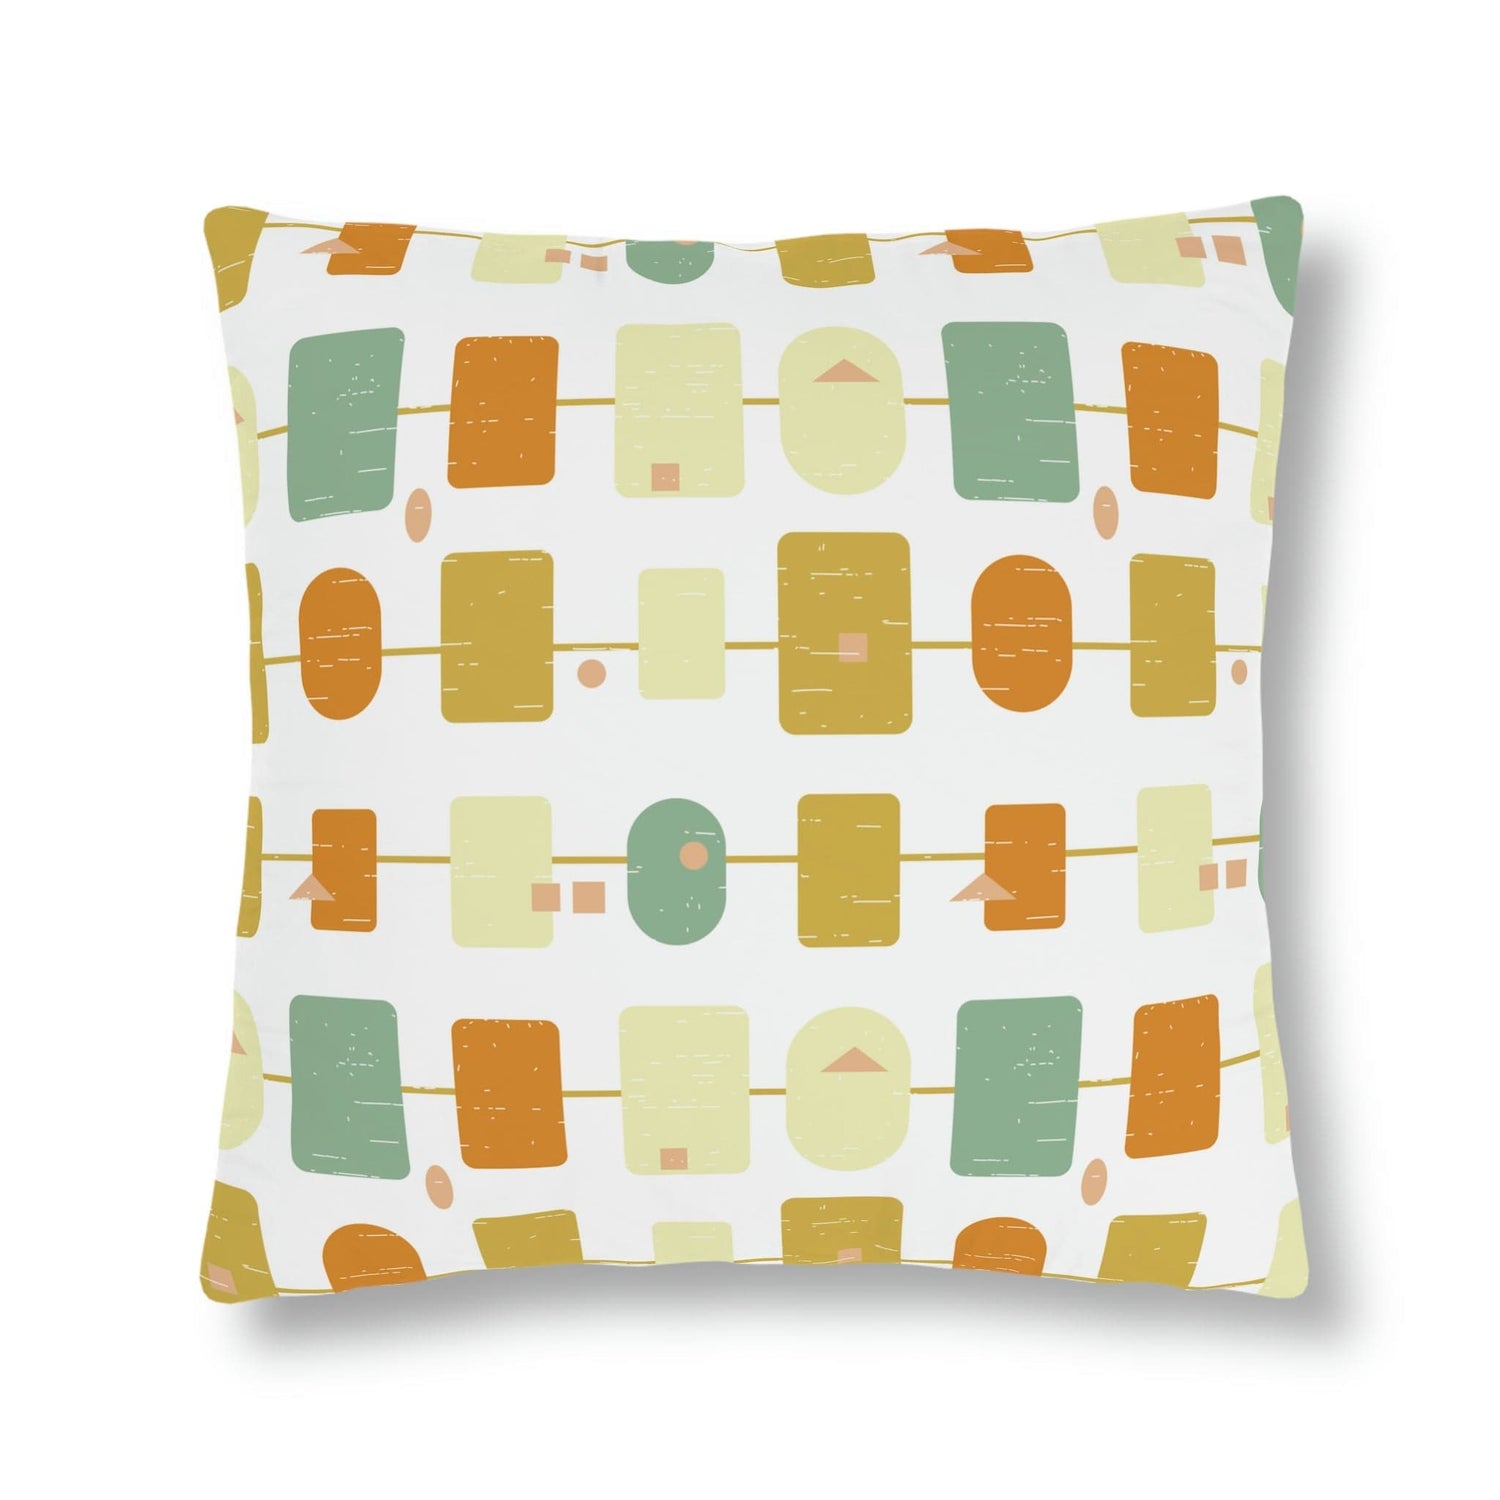 Kate McEnroe New York Outdoor Pillow in Mid Century Modern Abstract Geometric Print Outdoor Pillows 16&quot; × 16&quot; / Square 16821860350828405461